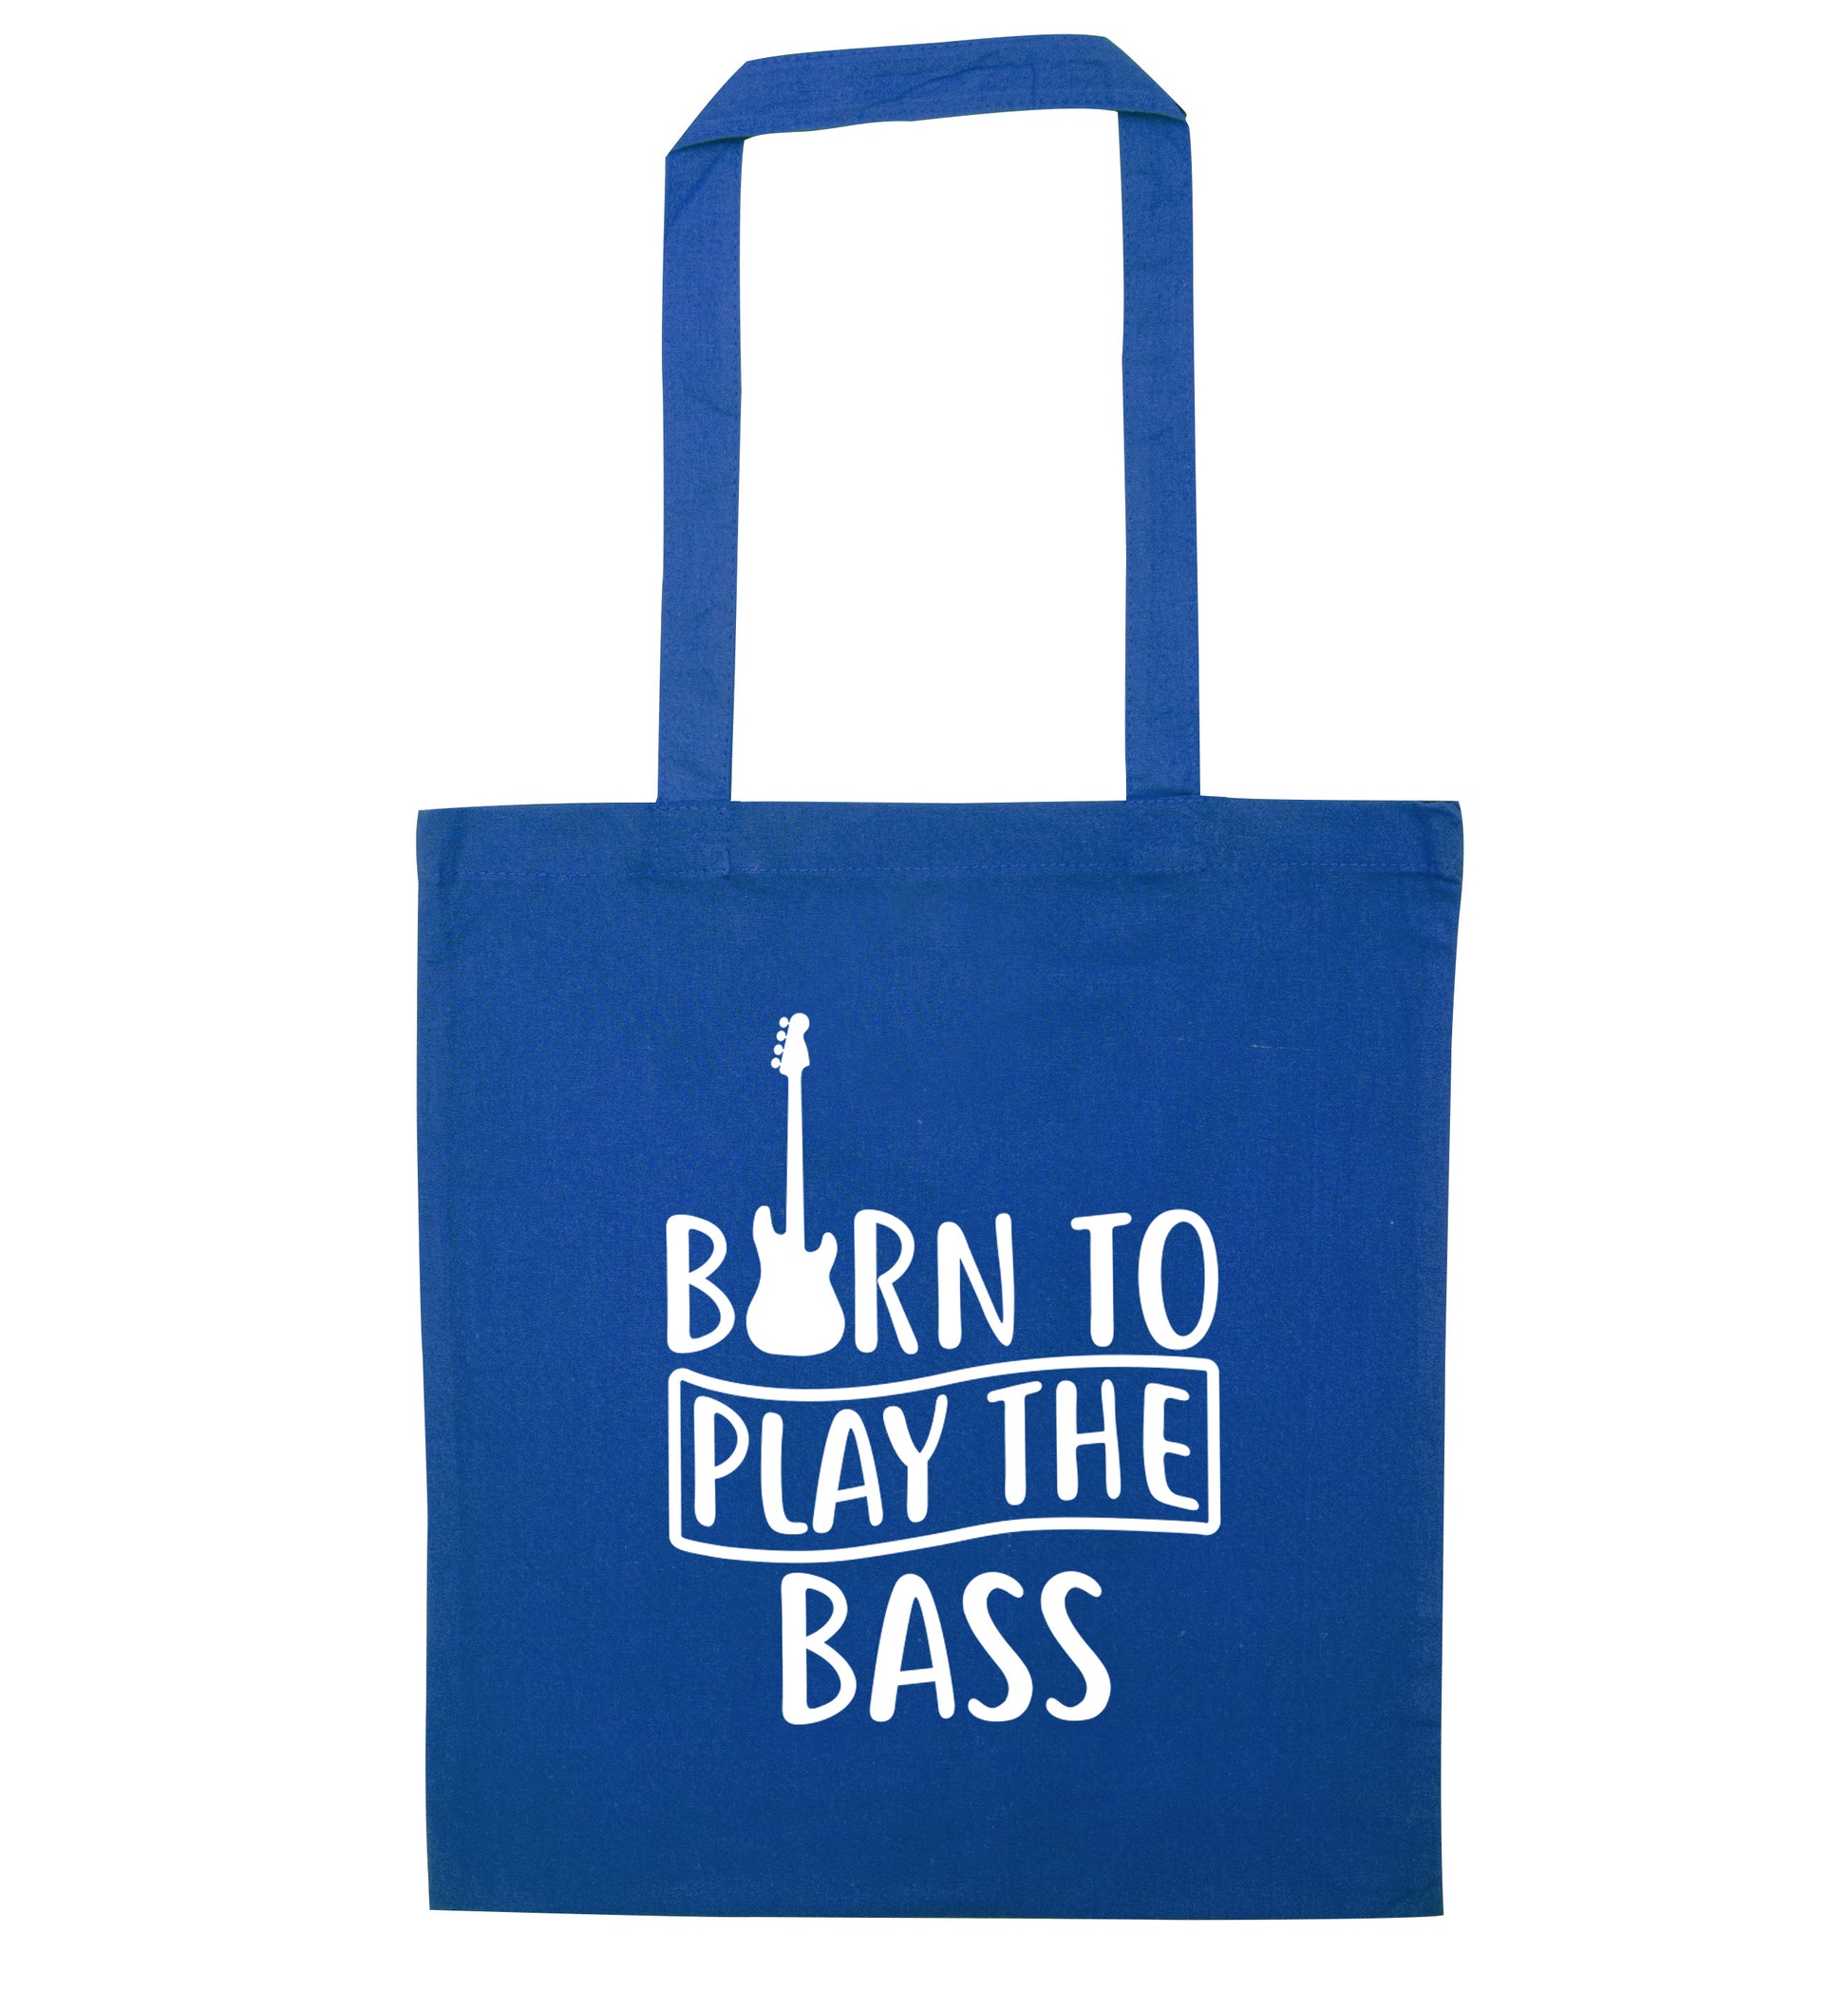 Born to play the bass blue tote bag